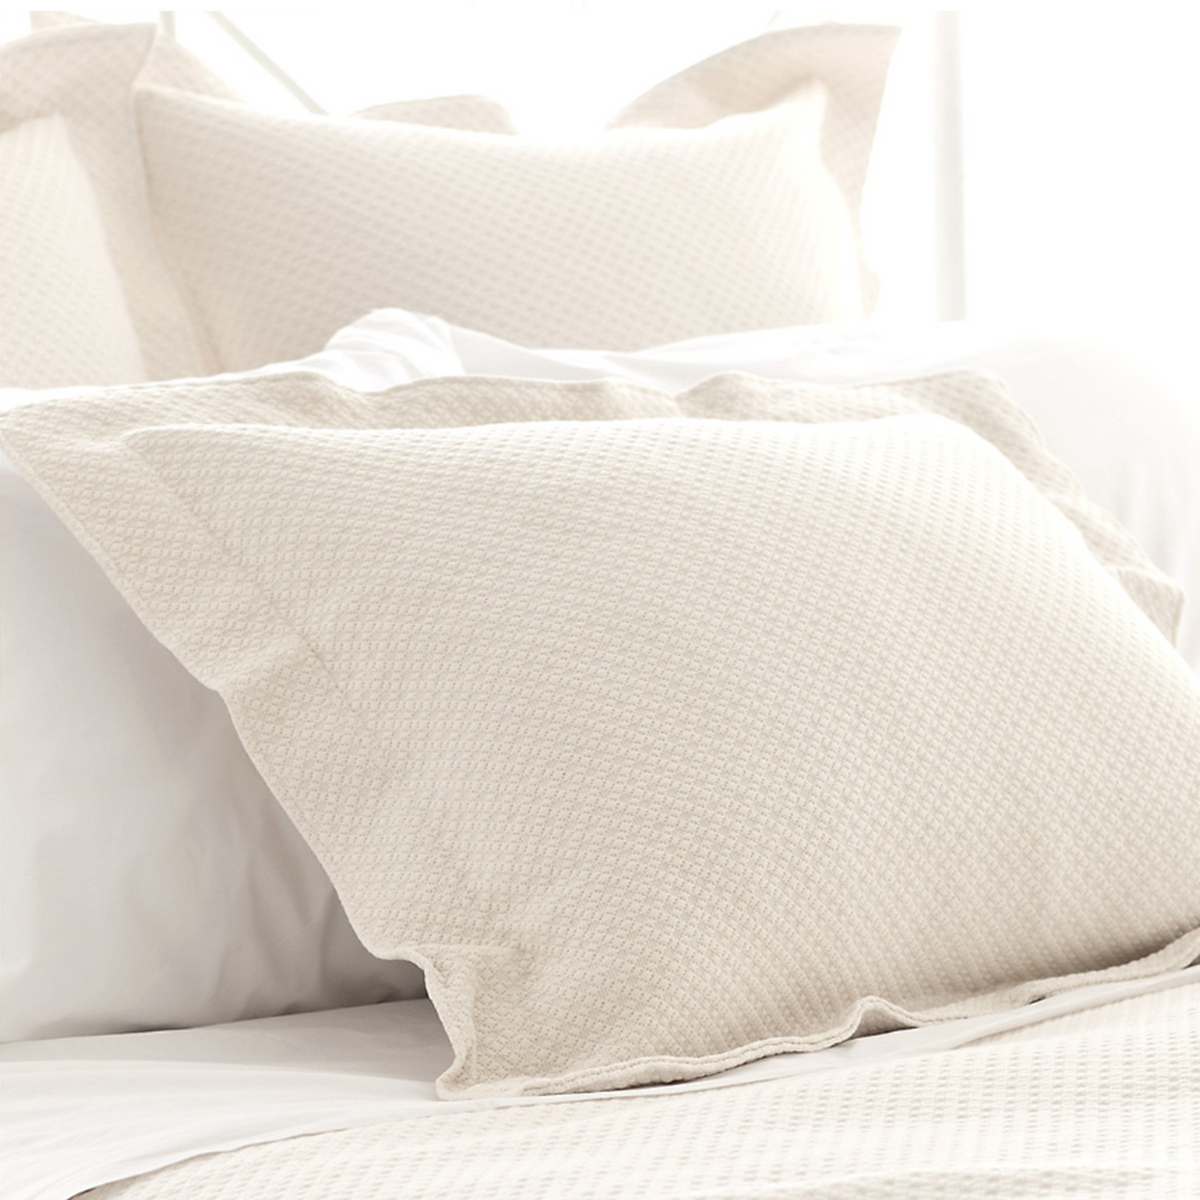 Detail Shot of Pine Cone Hill Petite Trellis Matelassé Coverlet and Shams in Ivory Color